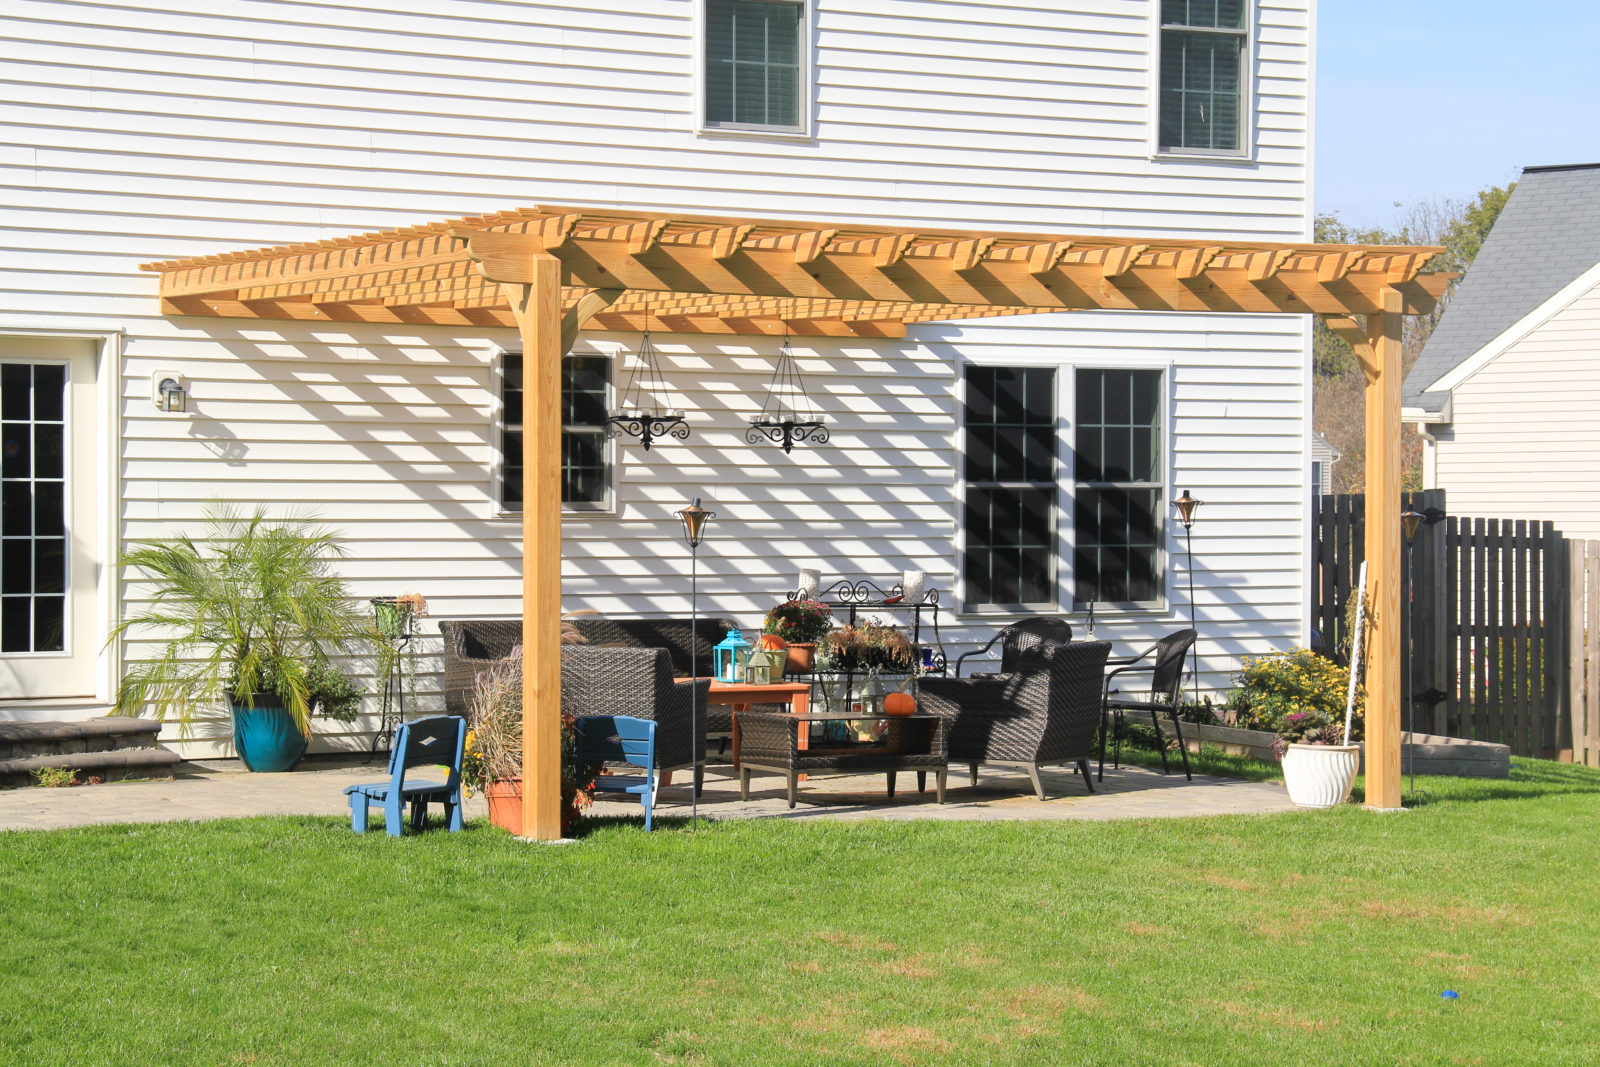 Wooden pergola attached to existing structure